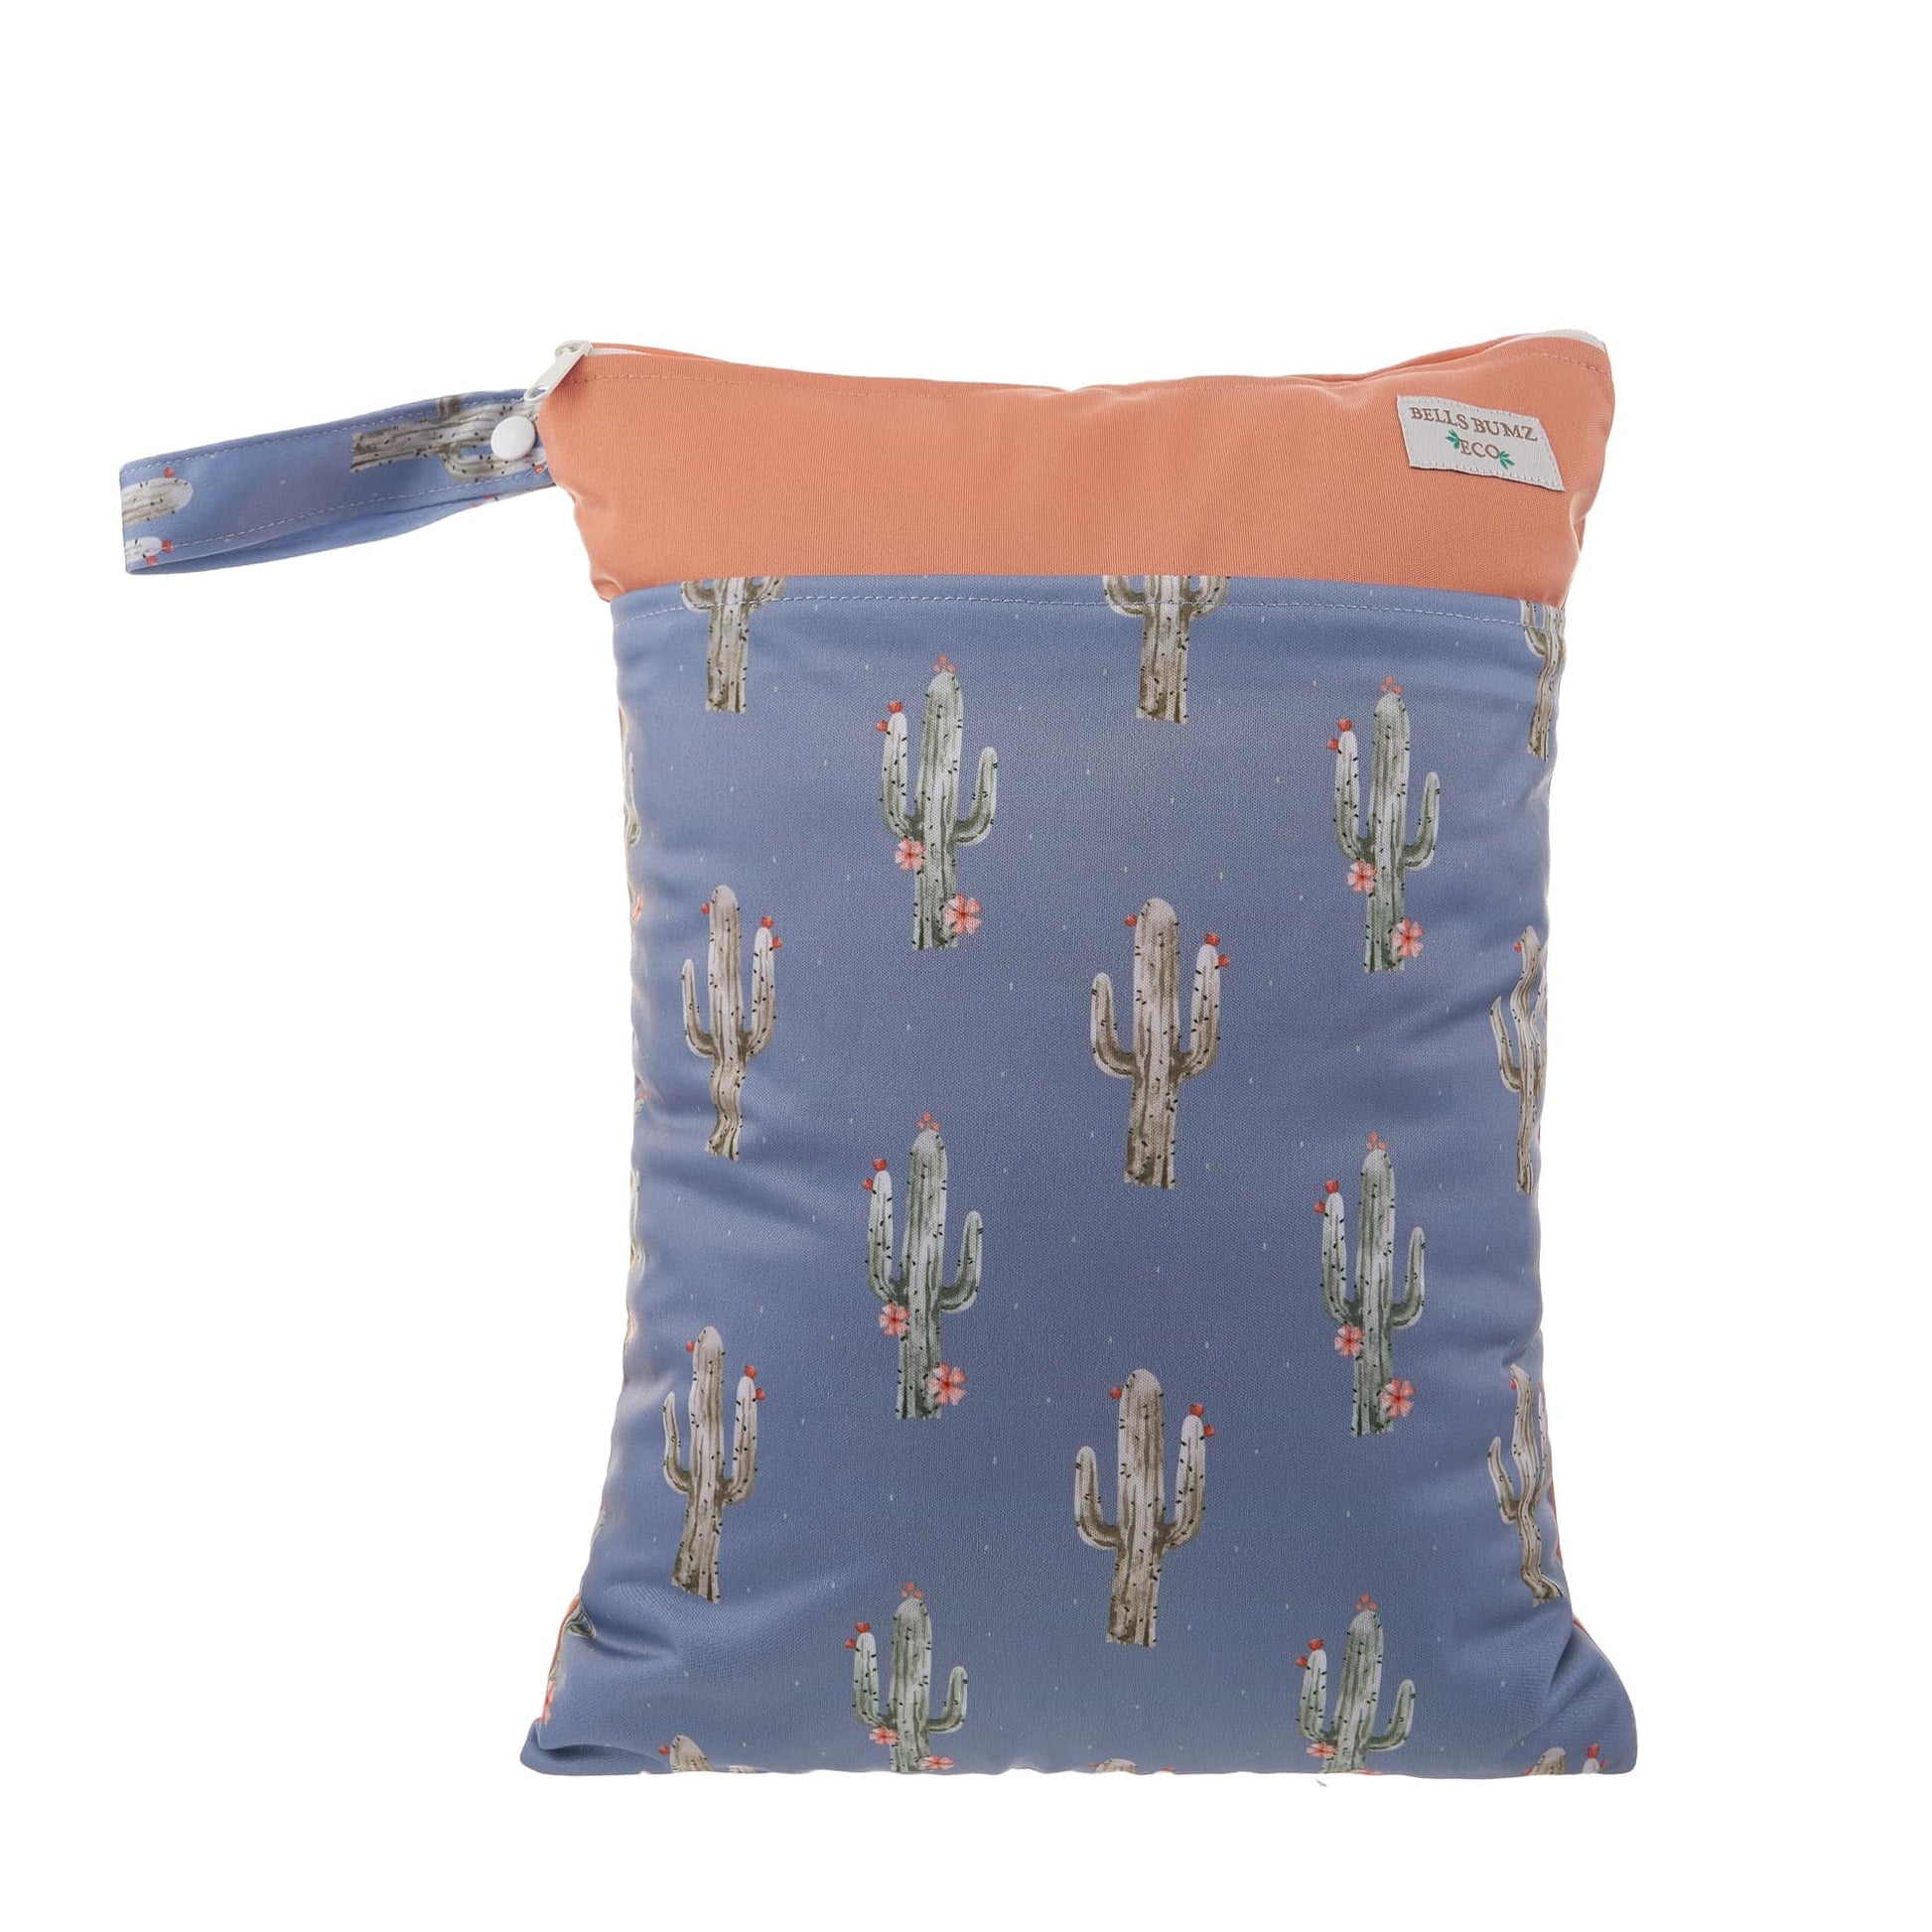 Double zip wet bag with a handle and a blue cactus print.